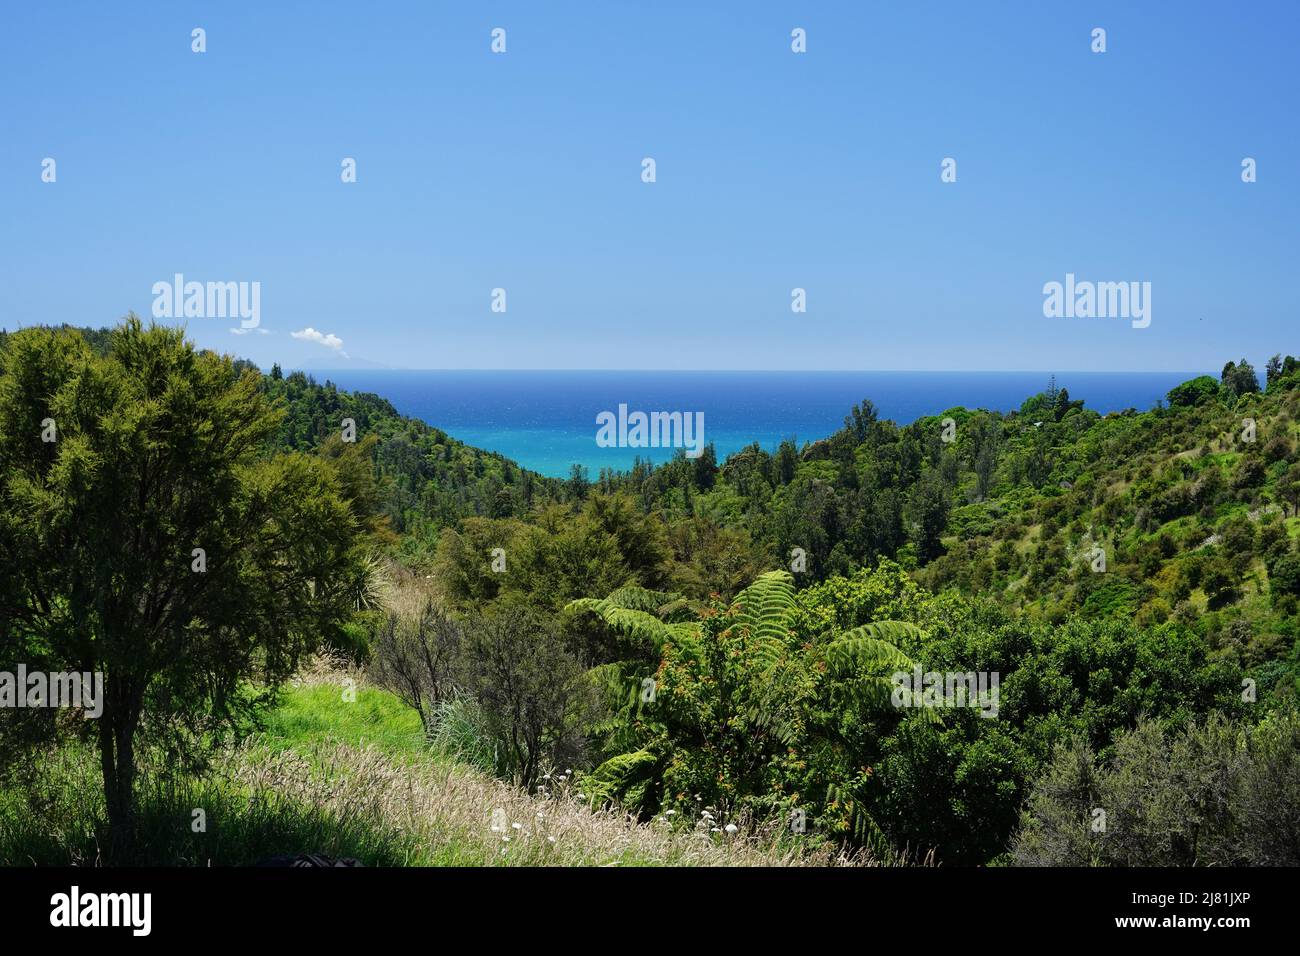 View of the Pacific Ocean from the Bay of Plenty region of New Zealand Stock Photo